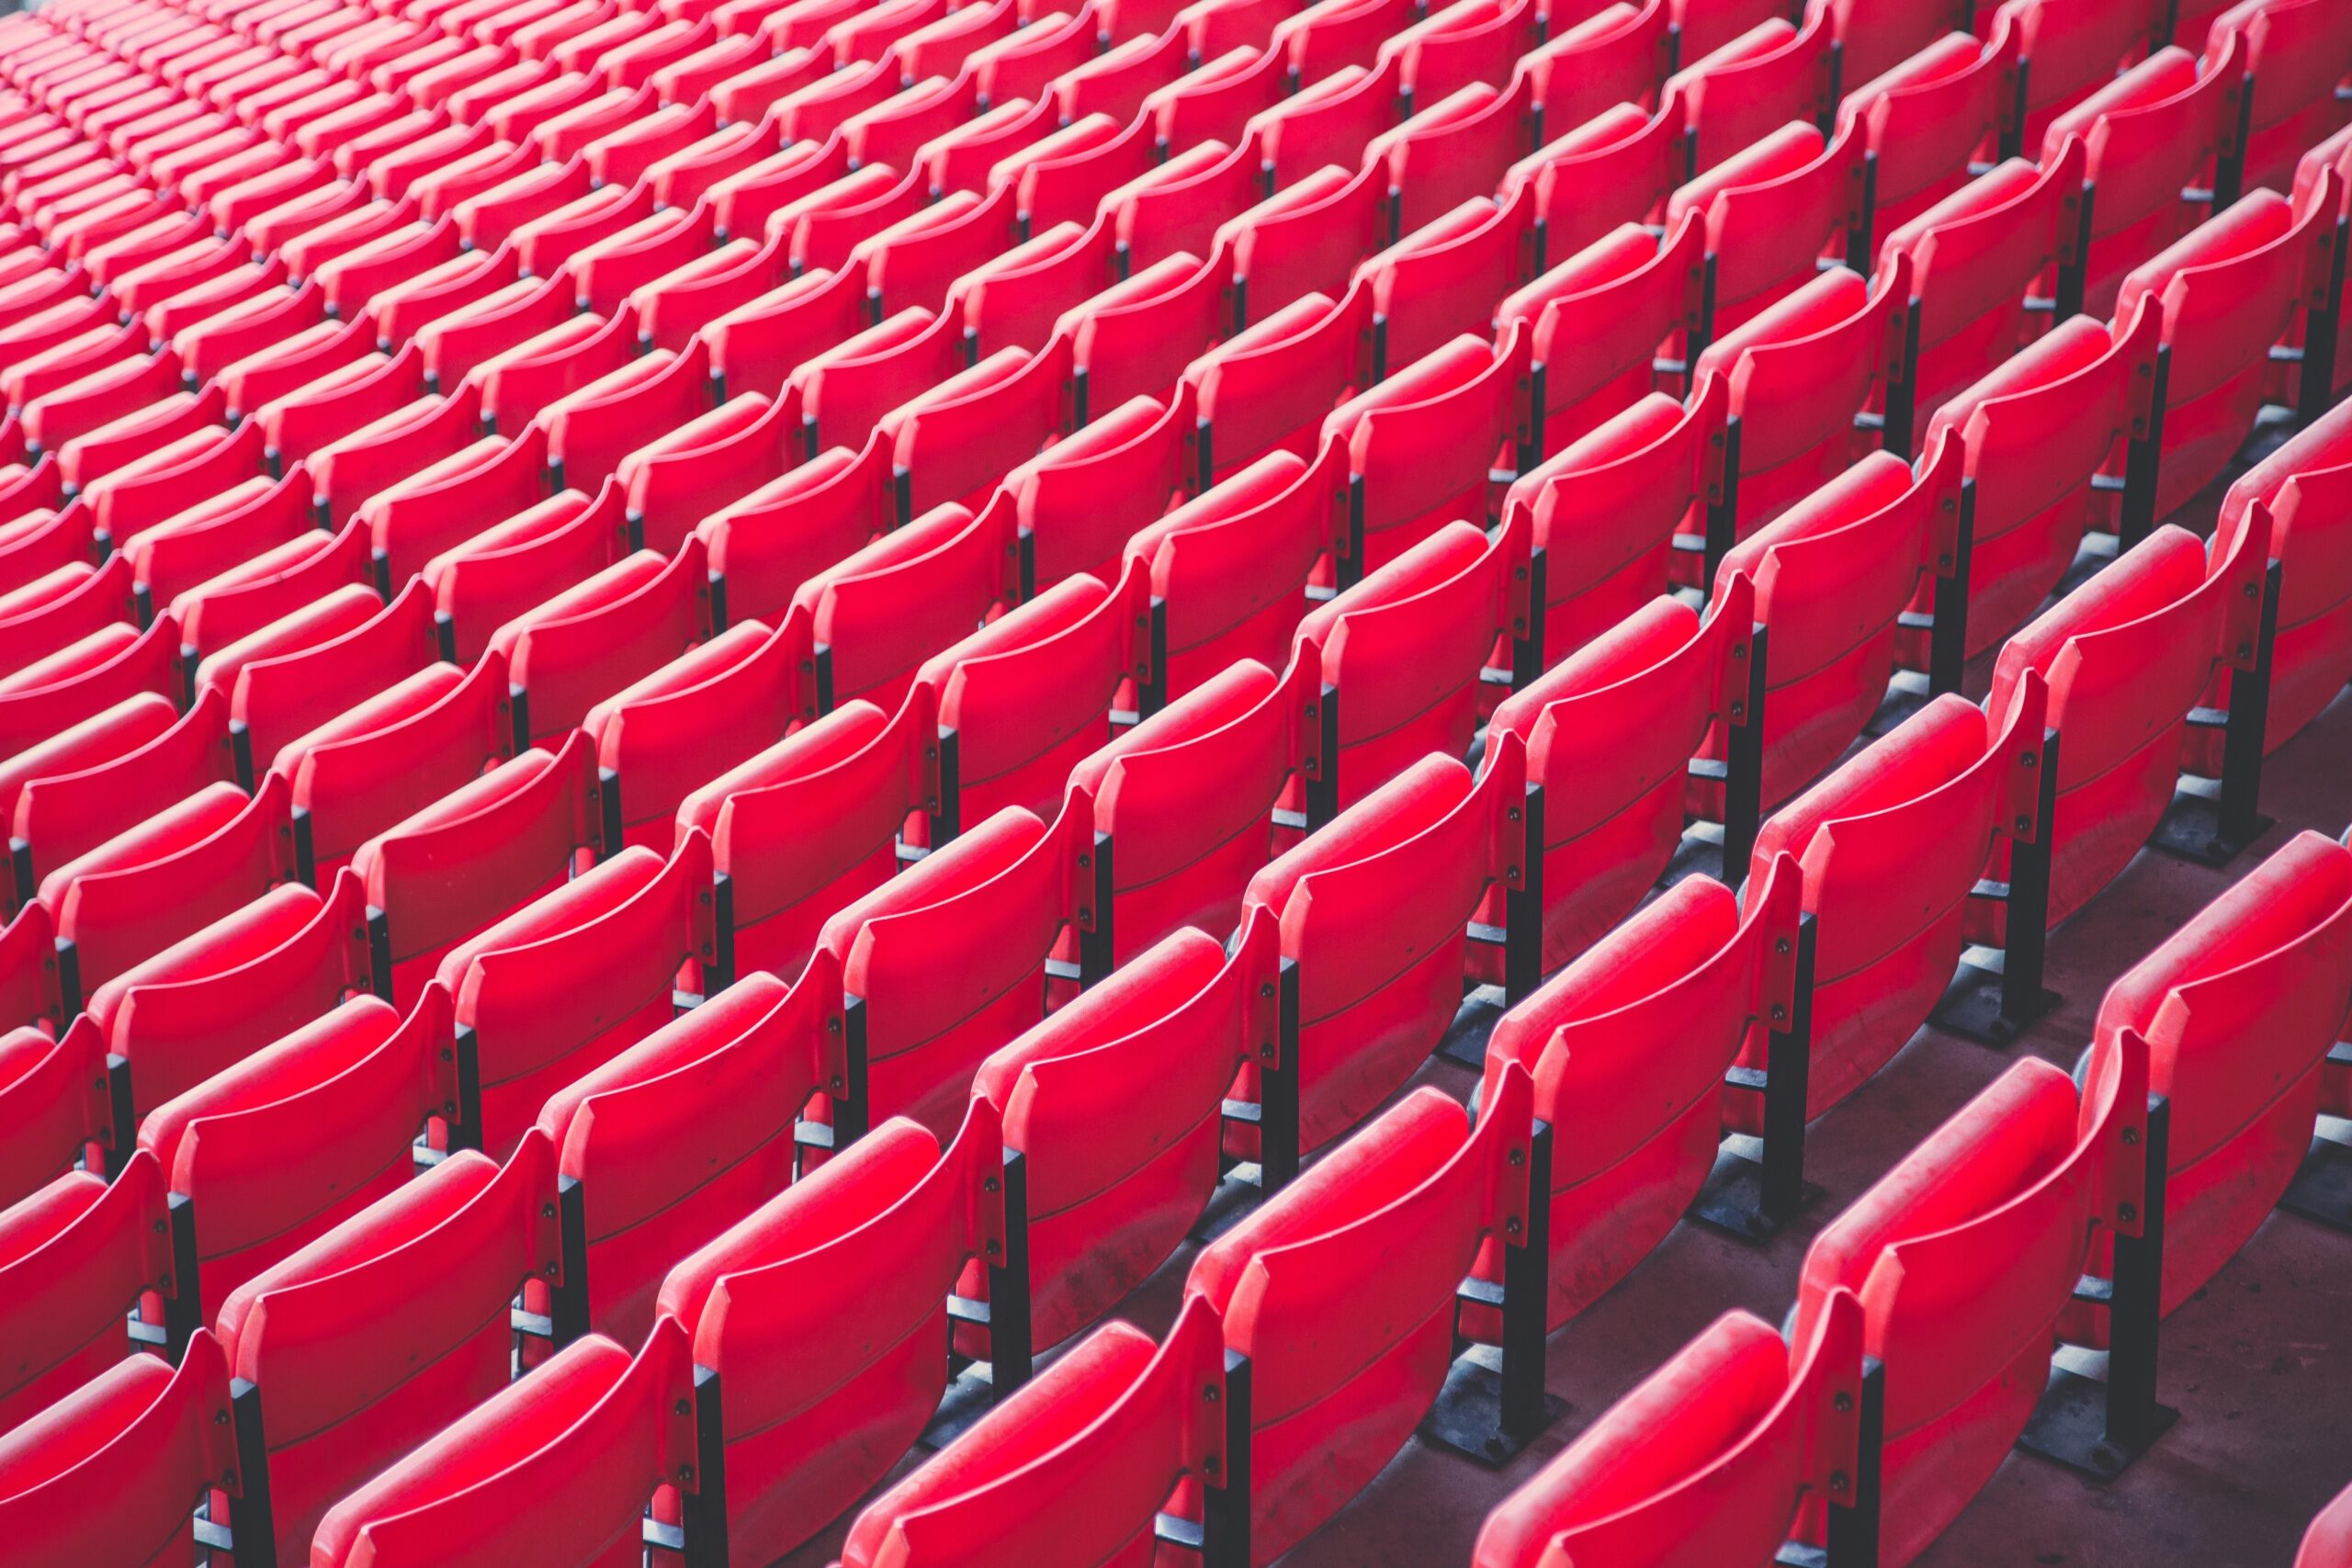 Rows of empty seating in a football stadium, calling to mind football, the importance of fans, and Wrexham AFC